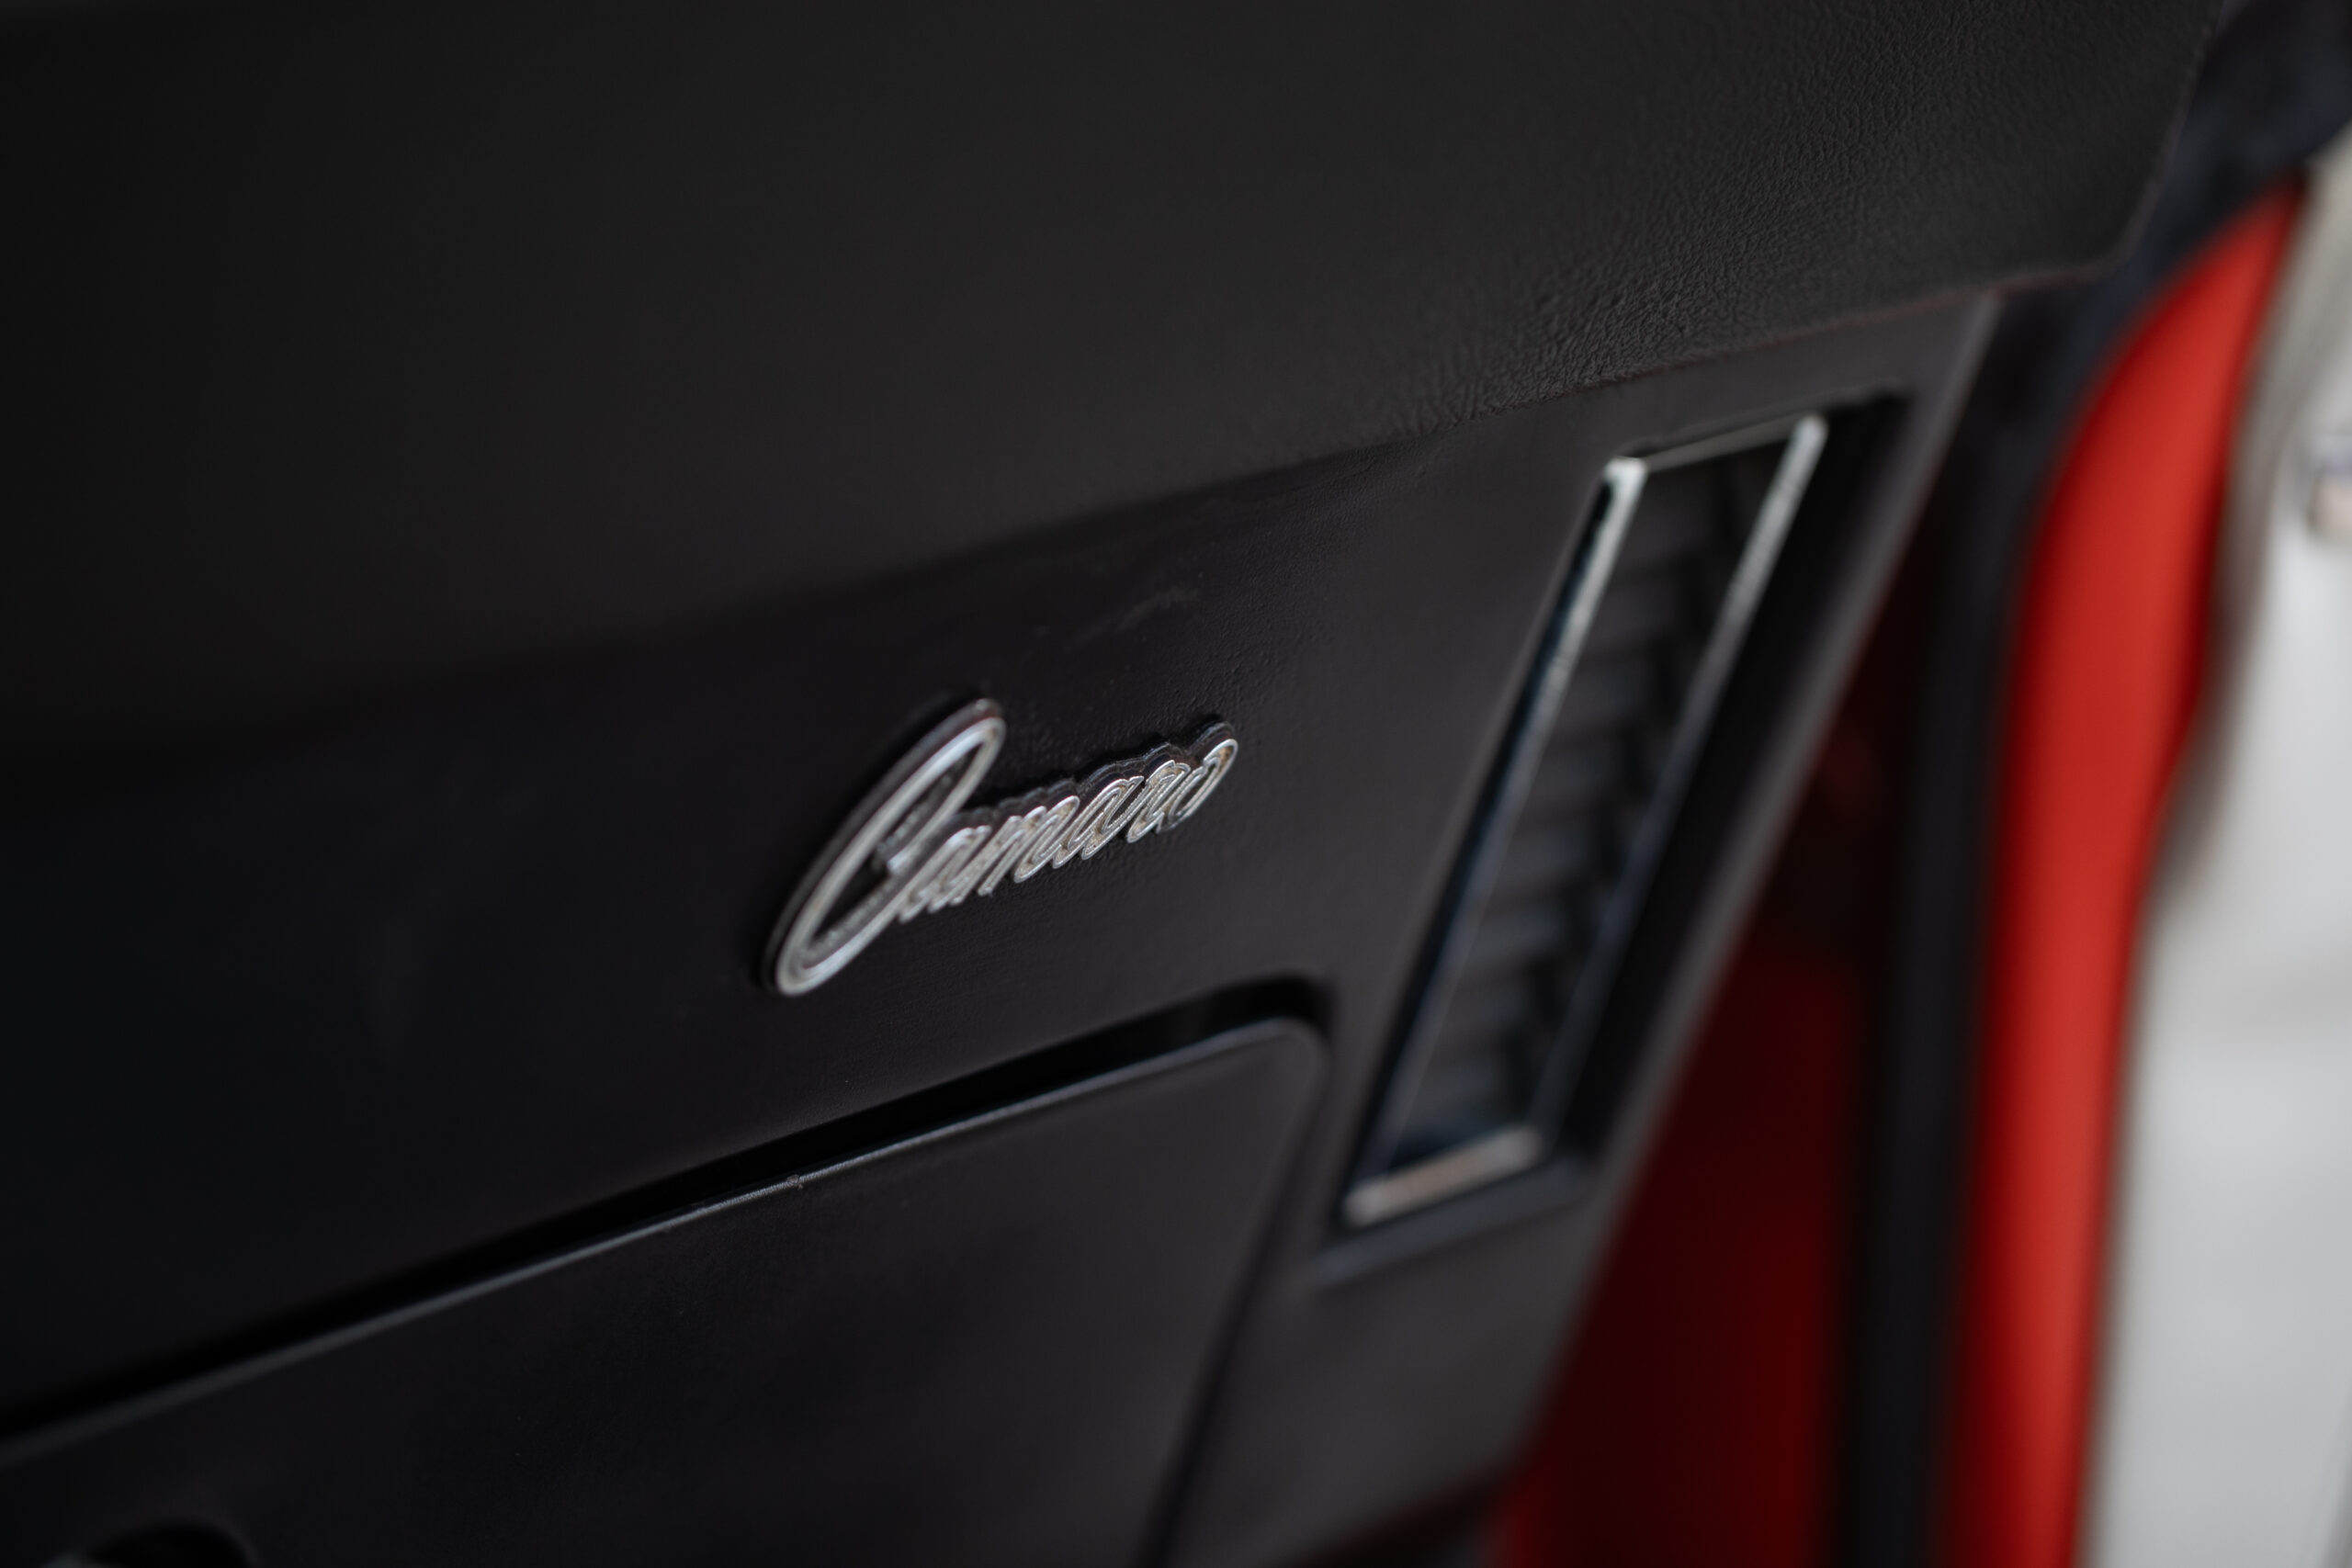 Close-up of a car interior showing the "Camaro" logo and a portion of the air vent. The dashboard appears to be black.